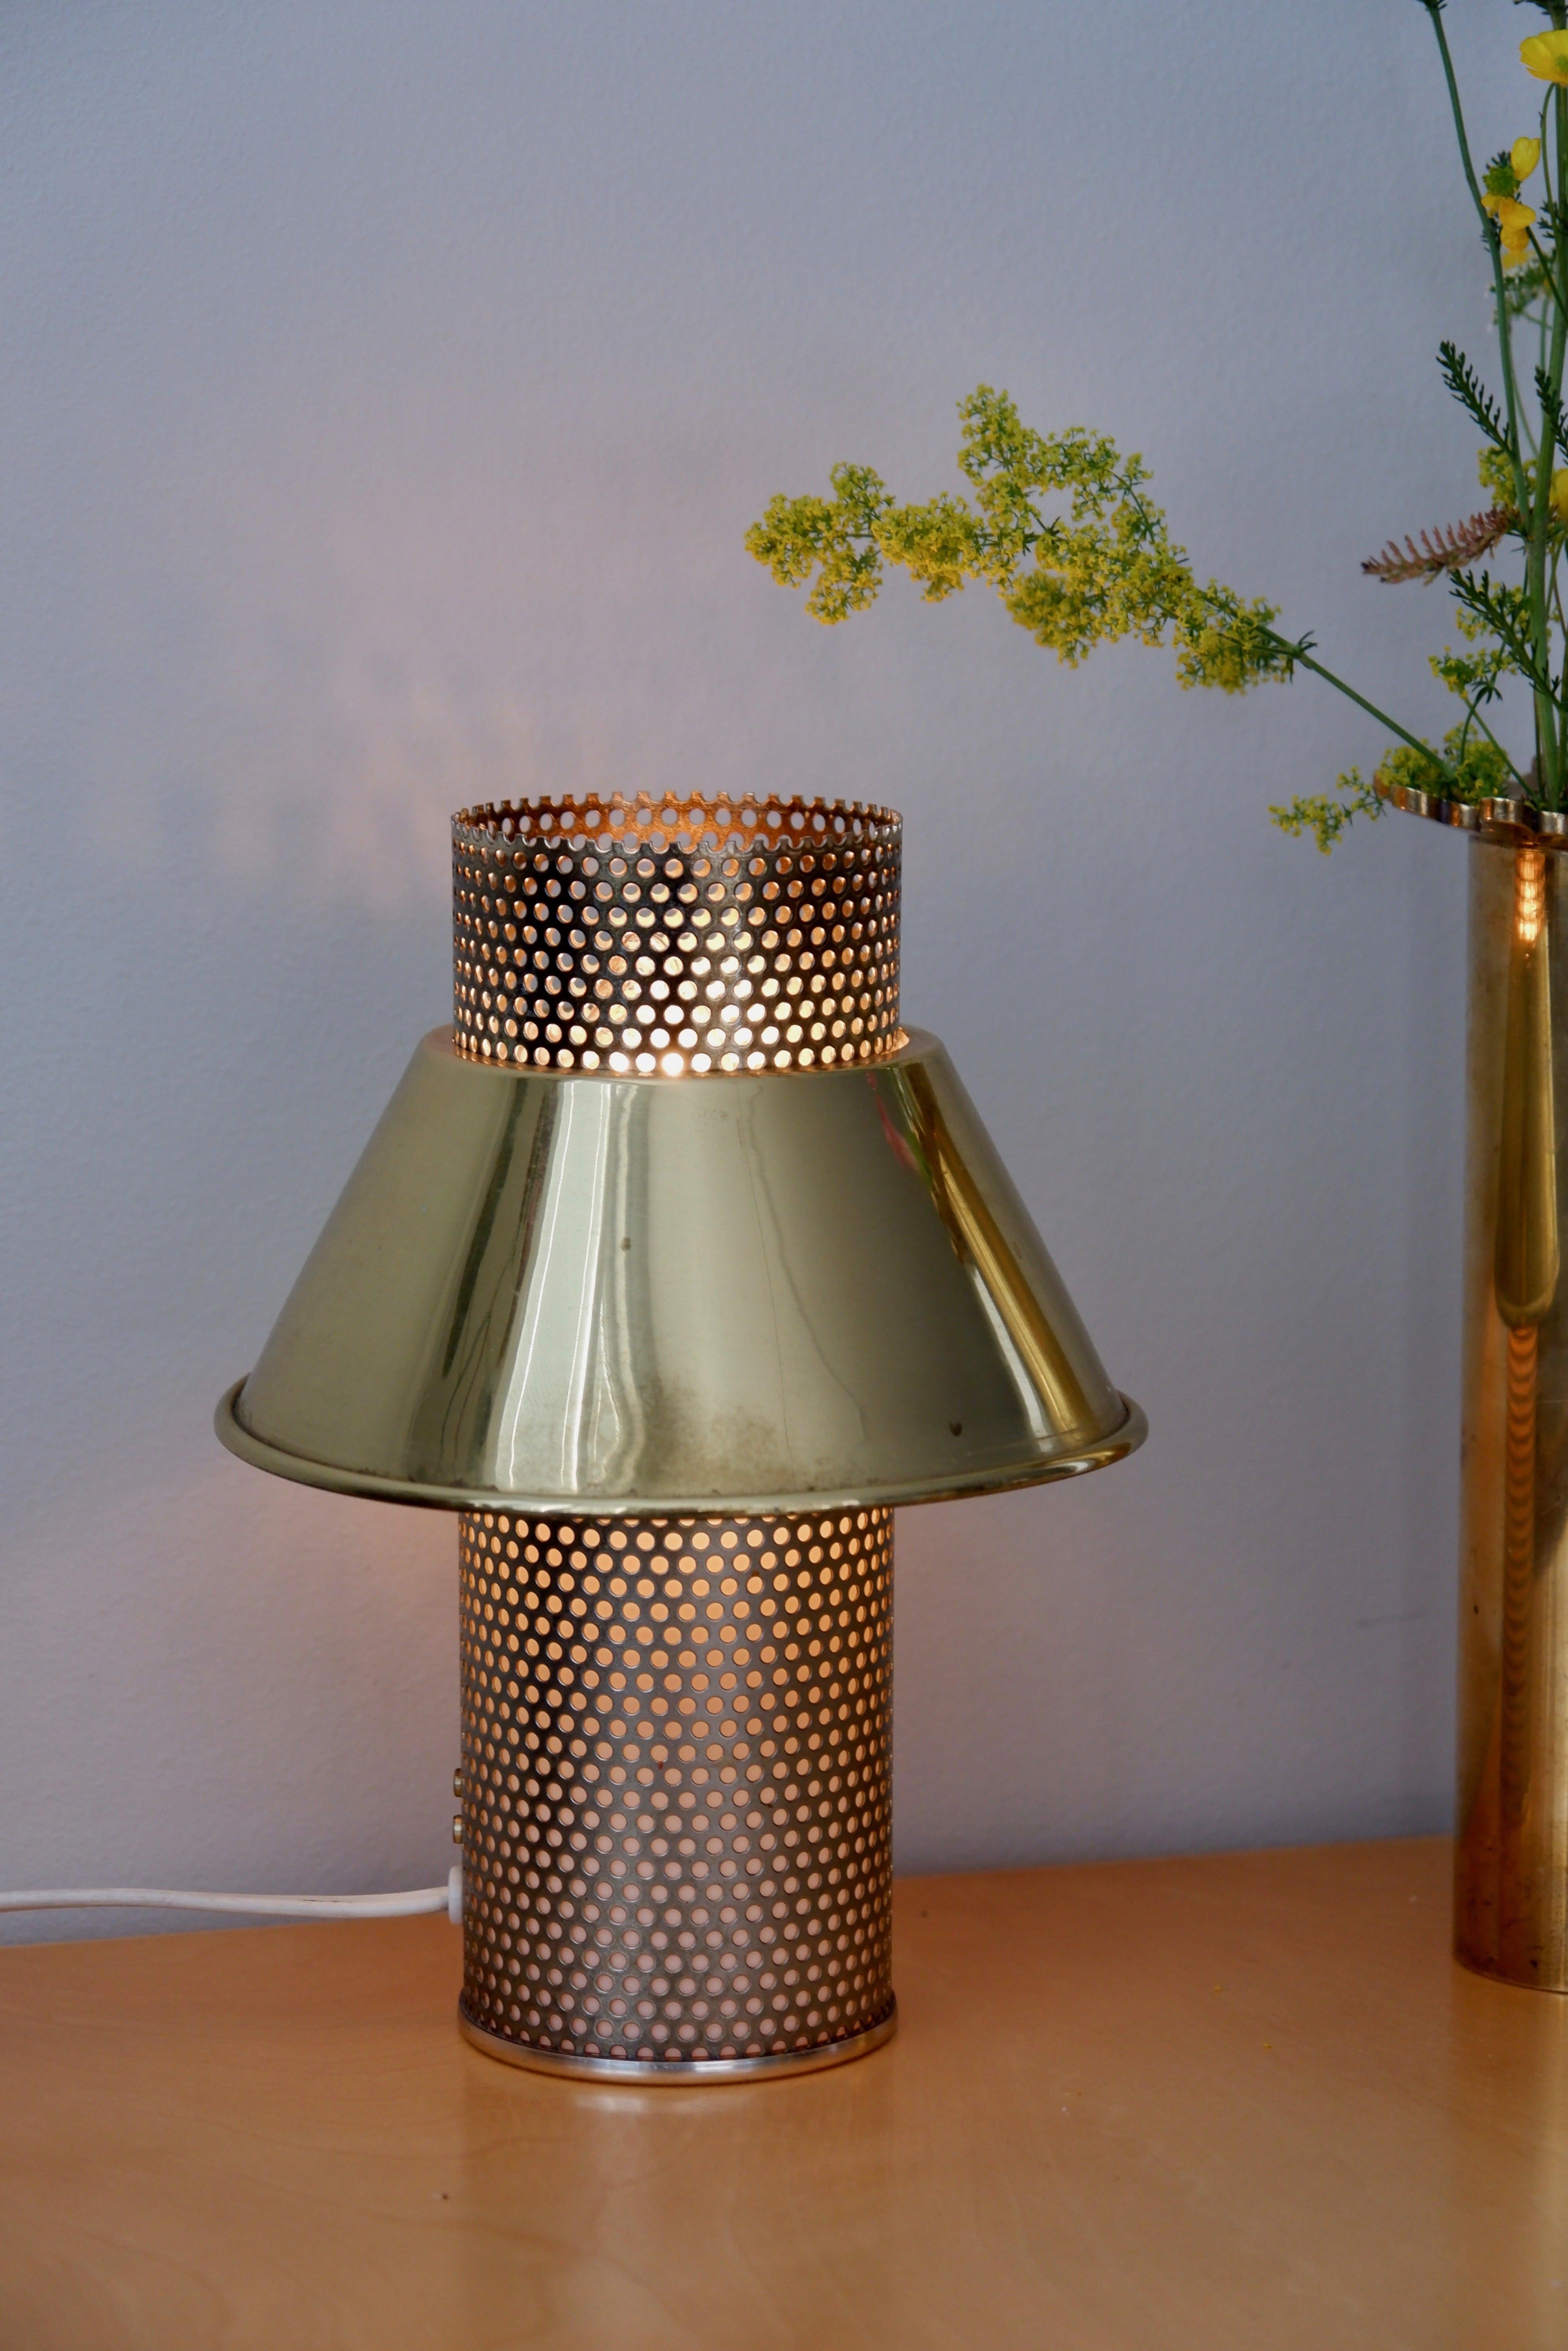 Minimalist table lamp designed by Hans Agne Jakobsson in the 60's and produced in Markaryd sweden, model B202. The lamp is composed by a solid brass shade and an aliminum perforated core. The lamp is stamped by the editor. Dimensions : H : 23 cm / L